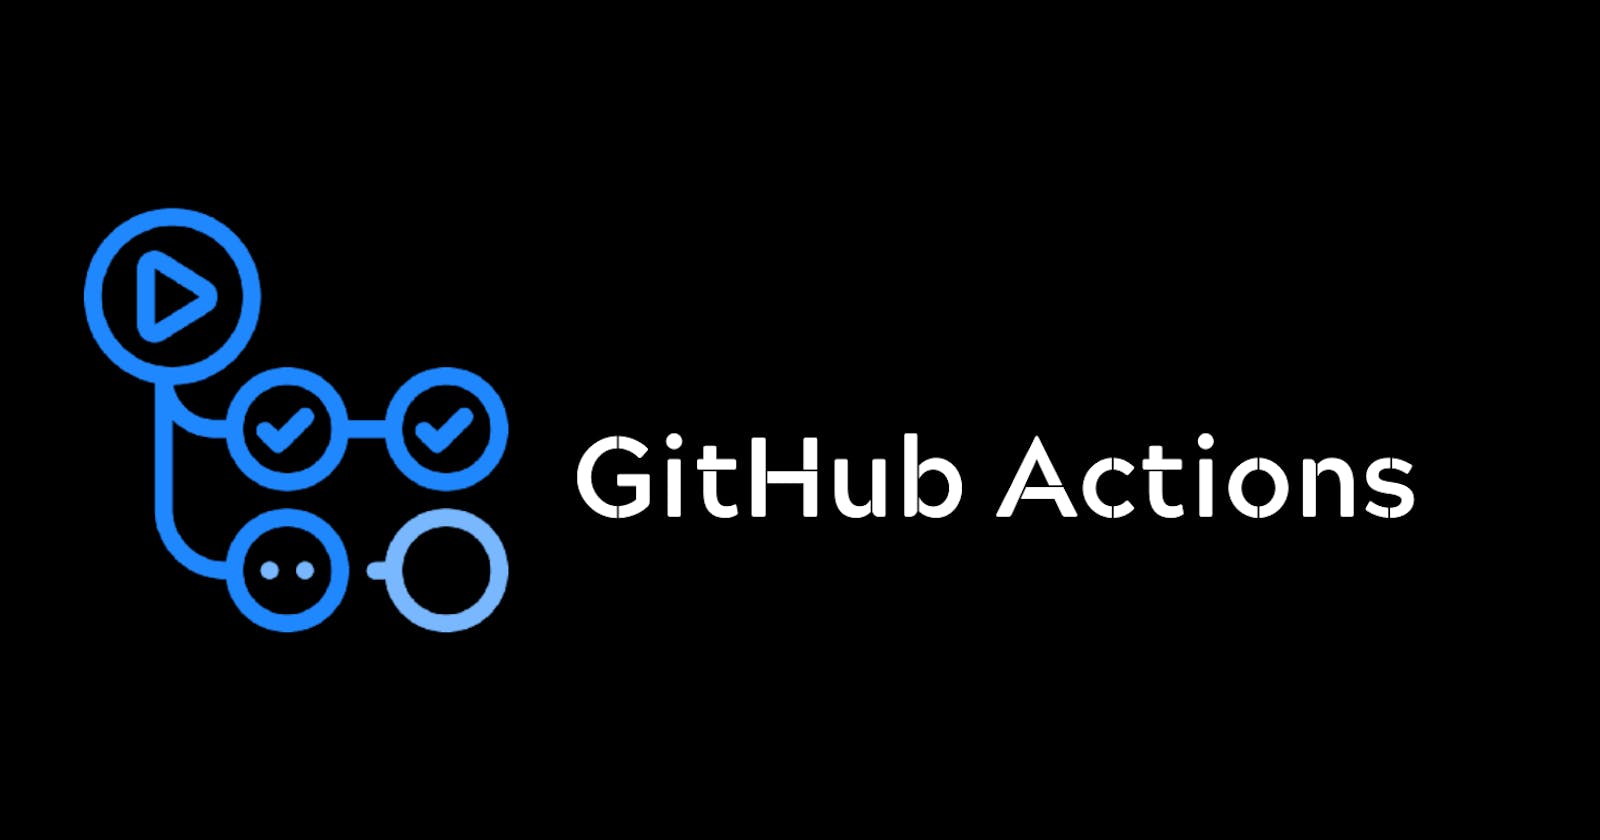 Introduction to GitHub Actions and how to use them